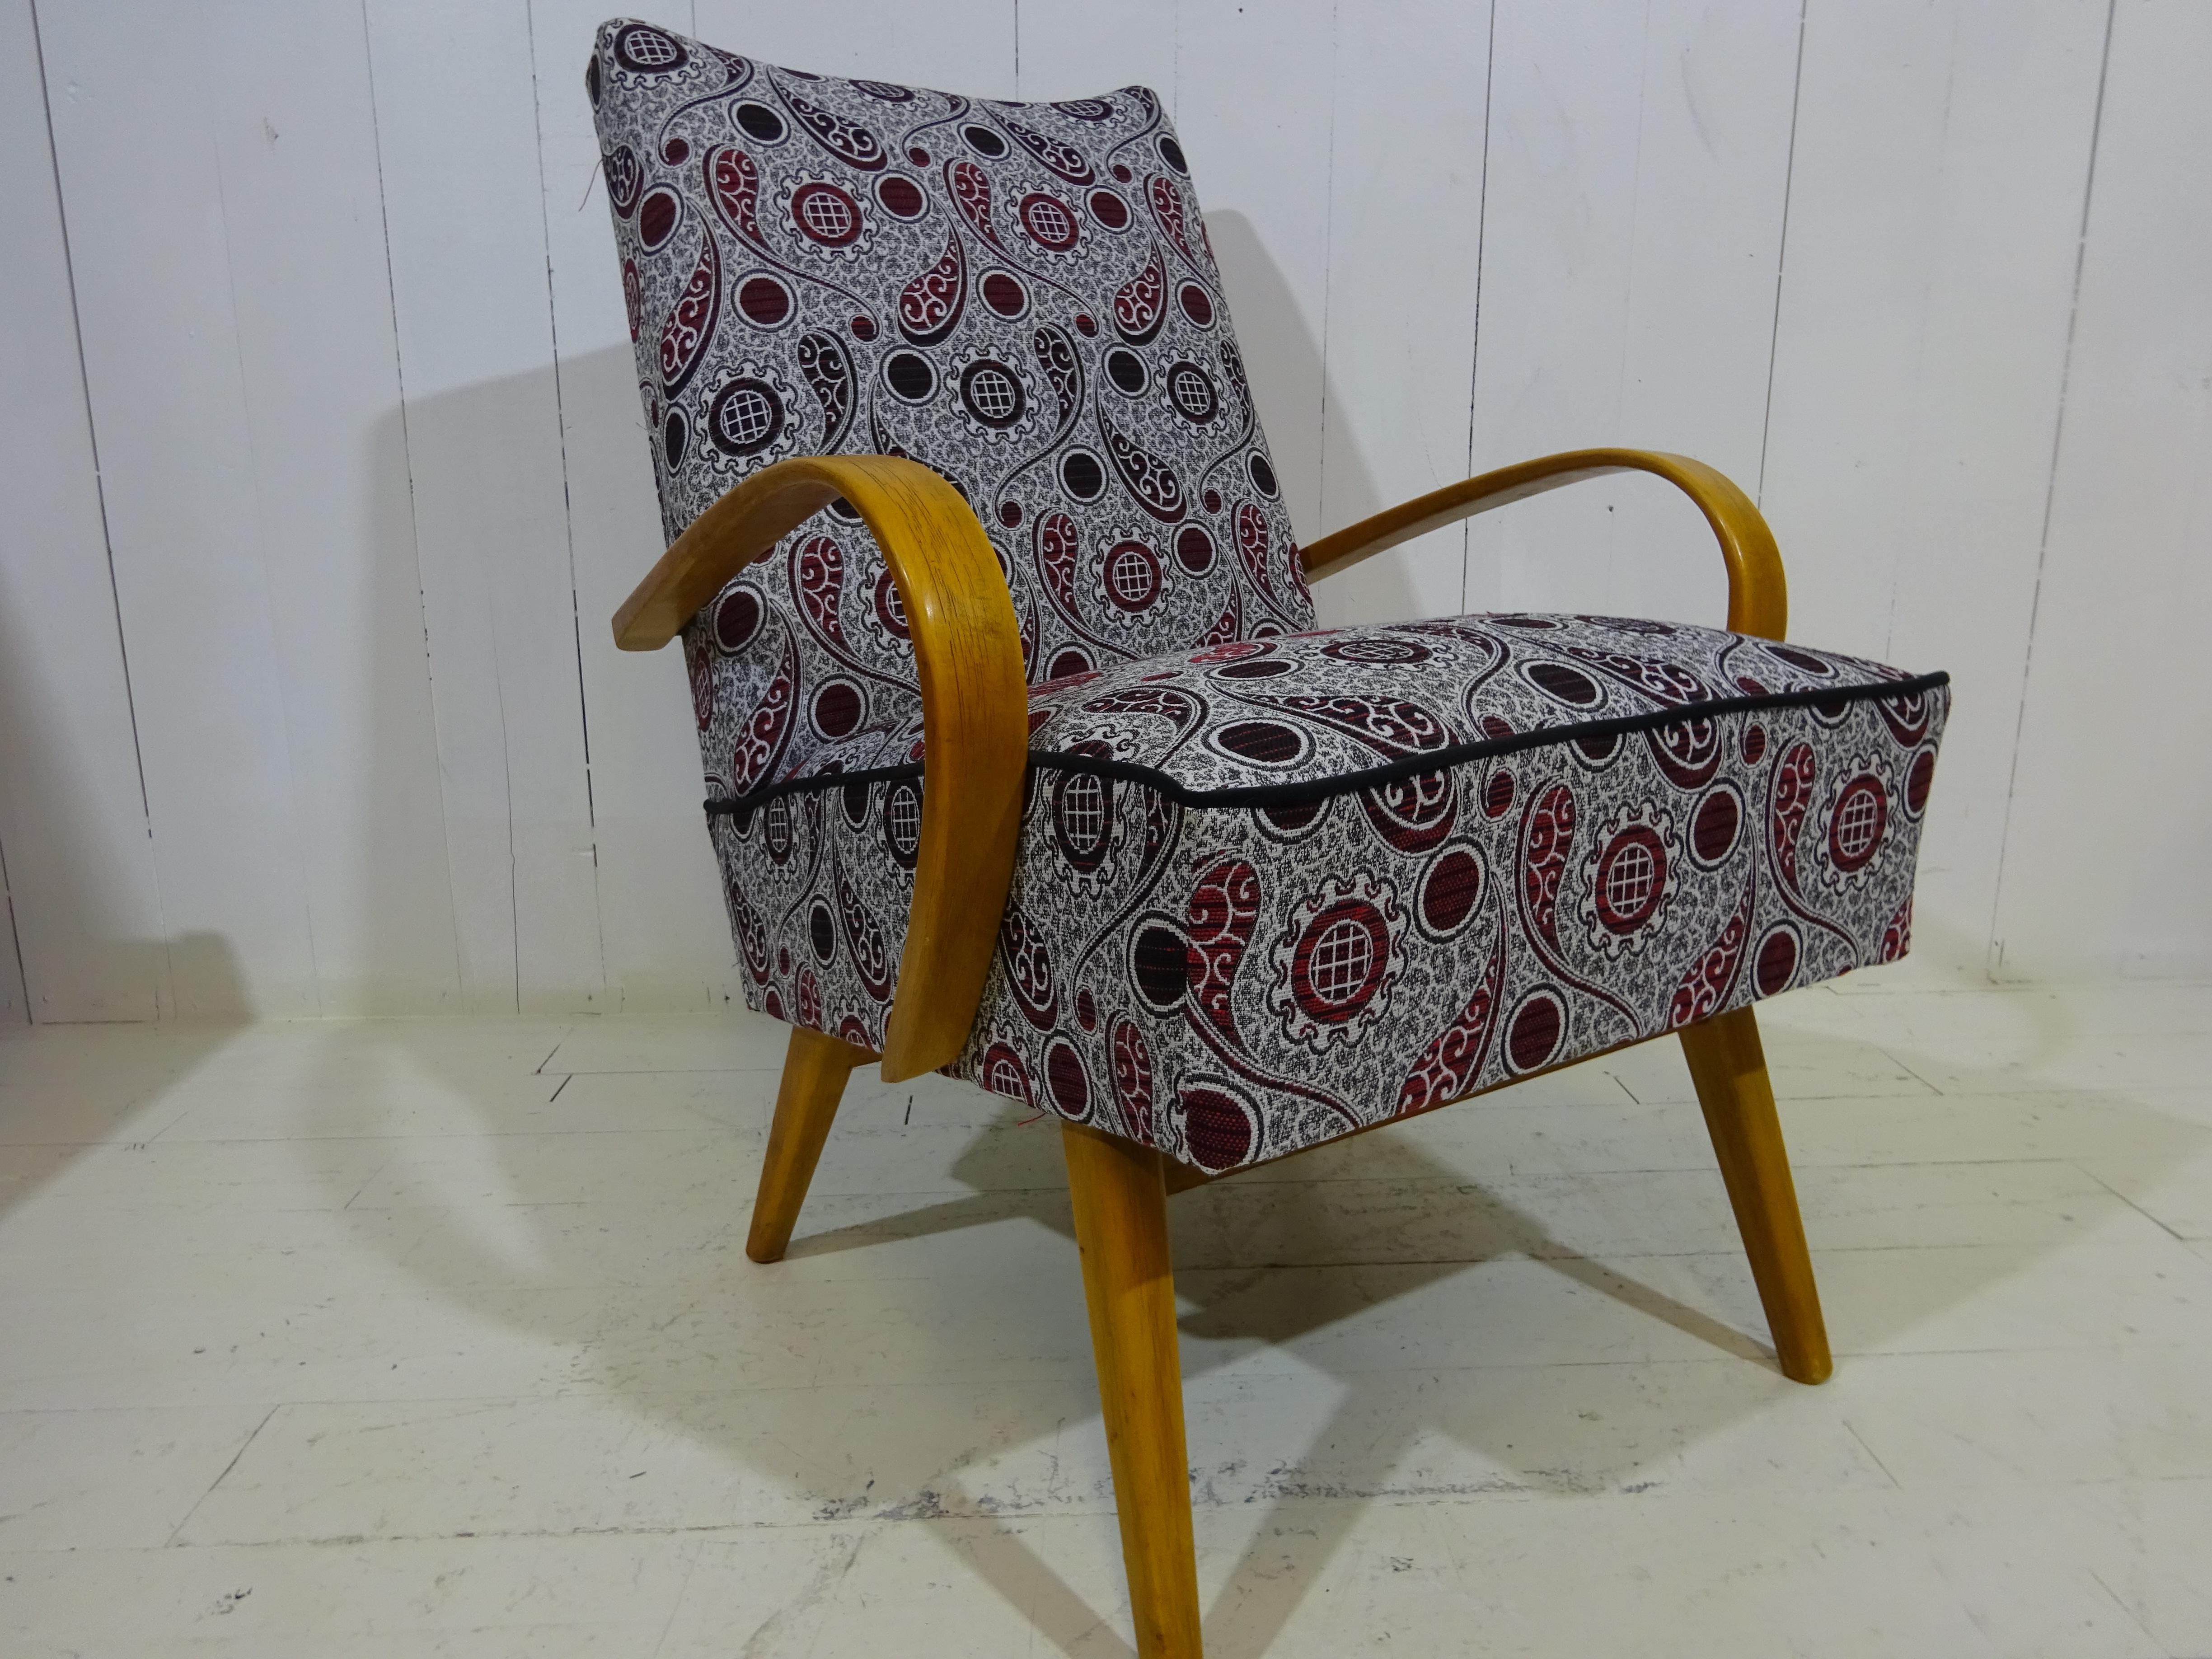 Limited edition mid-century lounge chair by Jitona 

Love the look, shape and fabulous fabric on the mid-century designer chair by Jitona. 

The history of Jitona itself dates back to 1951 when small furniture manufacturers from Southern Bohemia